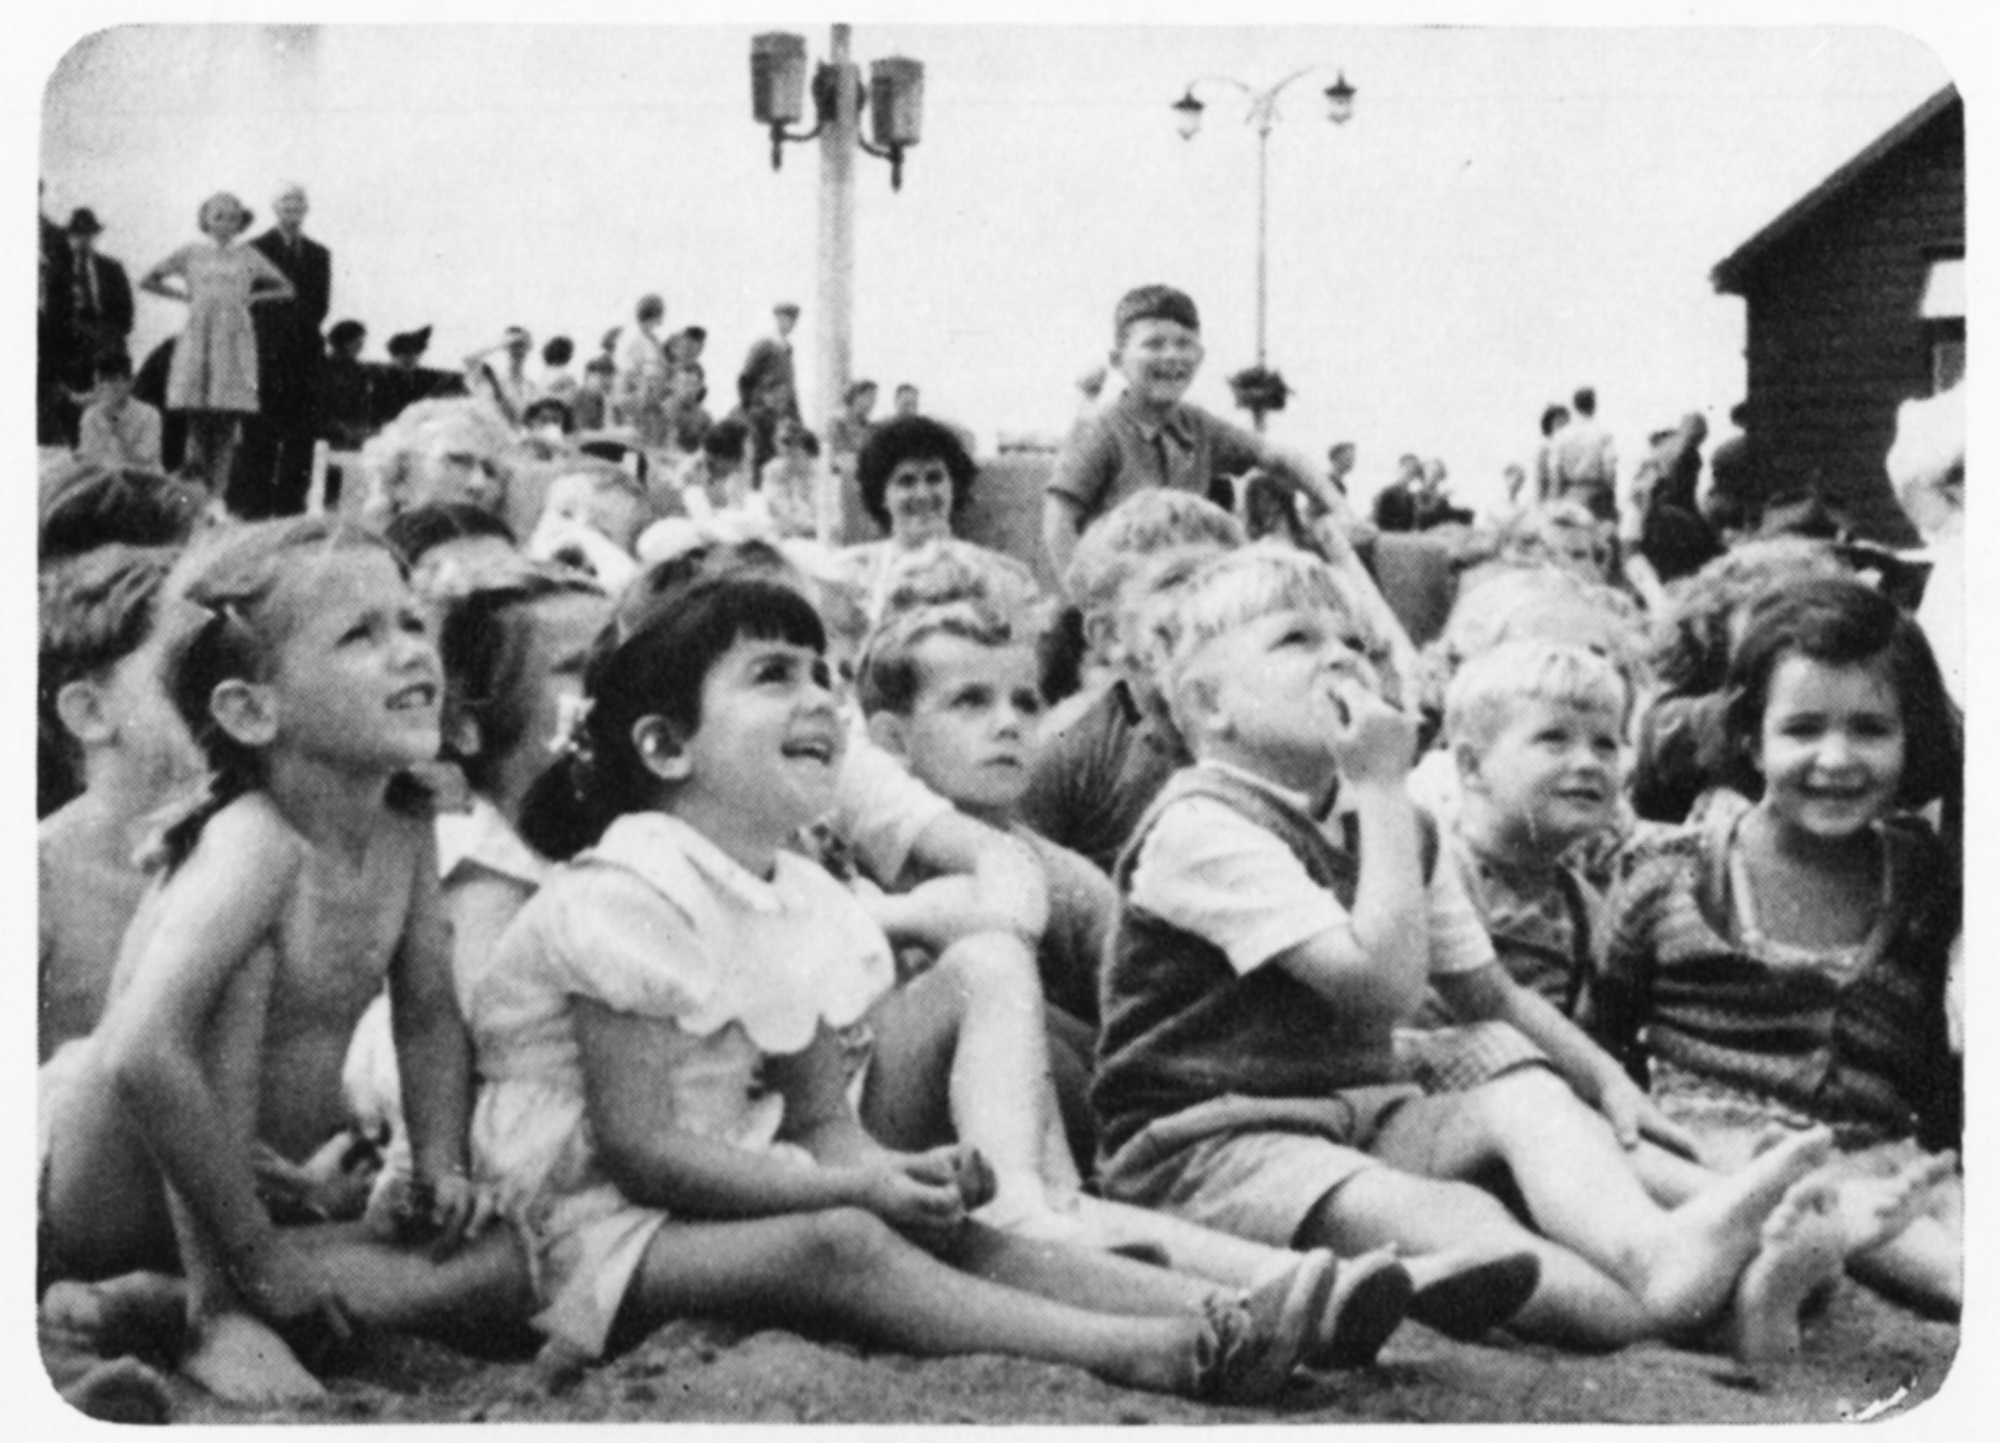 Children sit on the ground watching something off camera